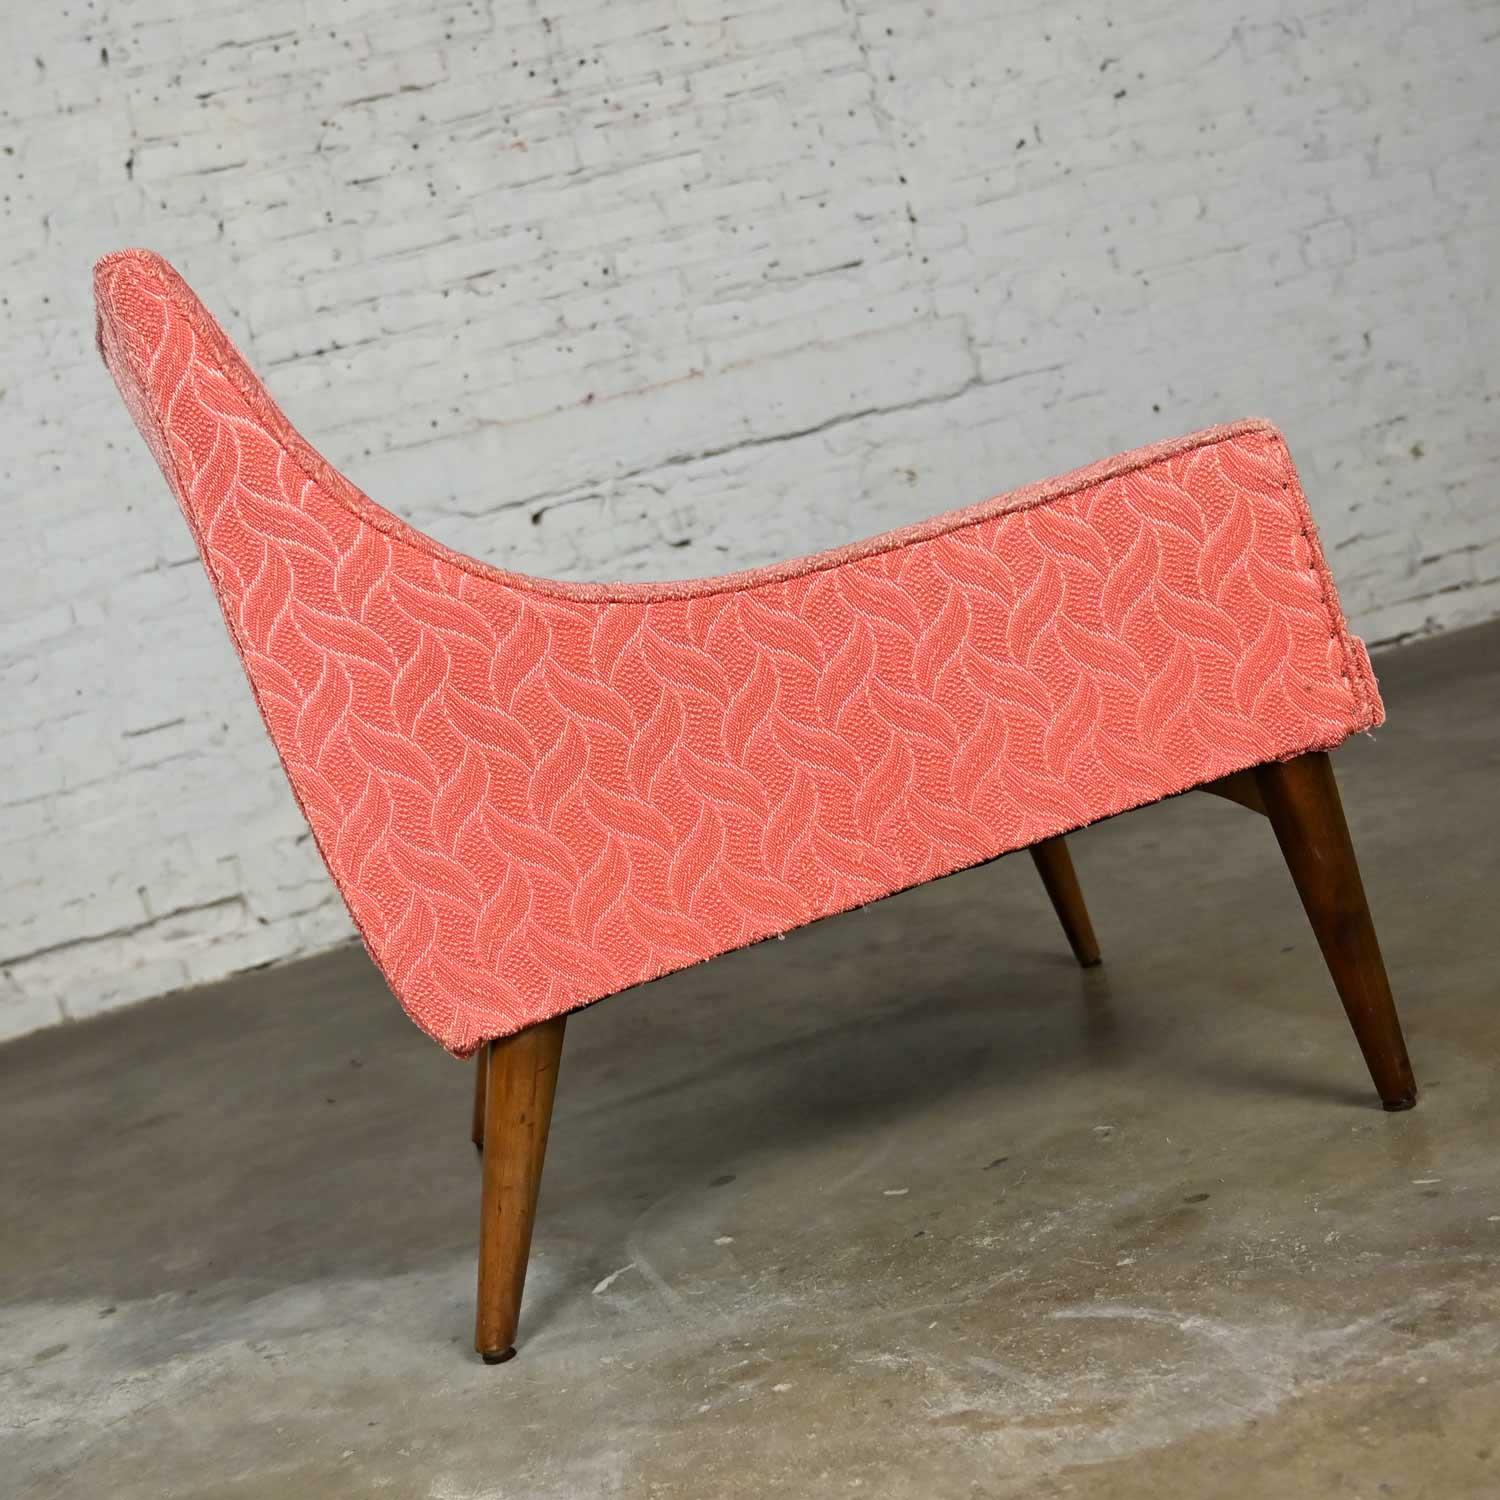 Fabric Vintage Mid-Century Modern Coral Frieze Upholstered Modified Slipper Chair For Sale